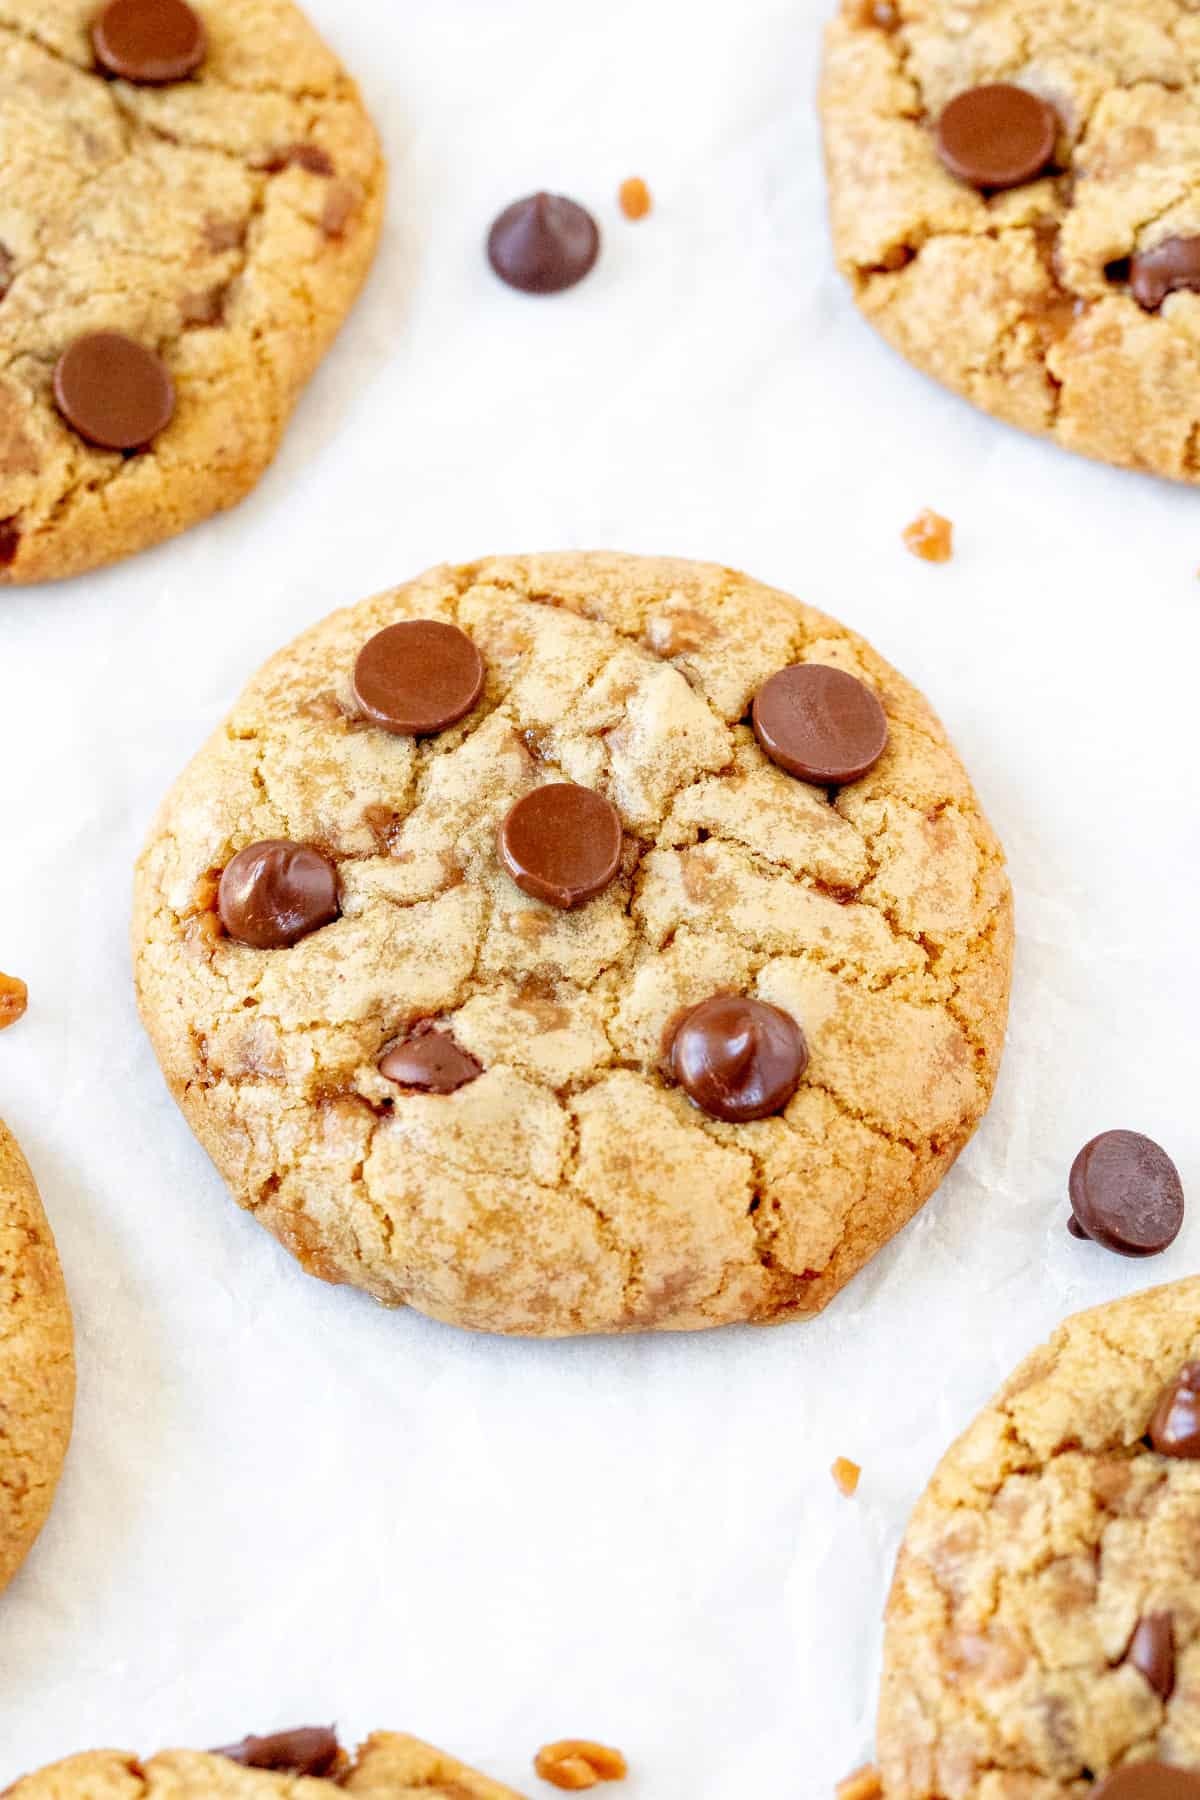 Brown butter toffee chocolate chip cookie, from above